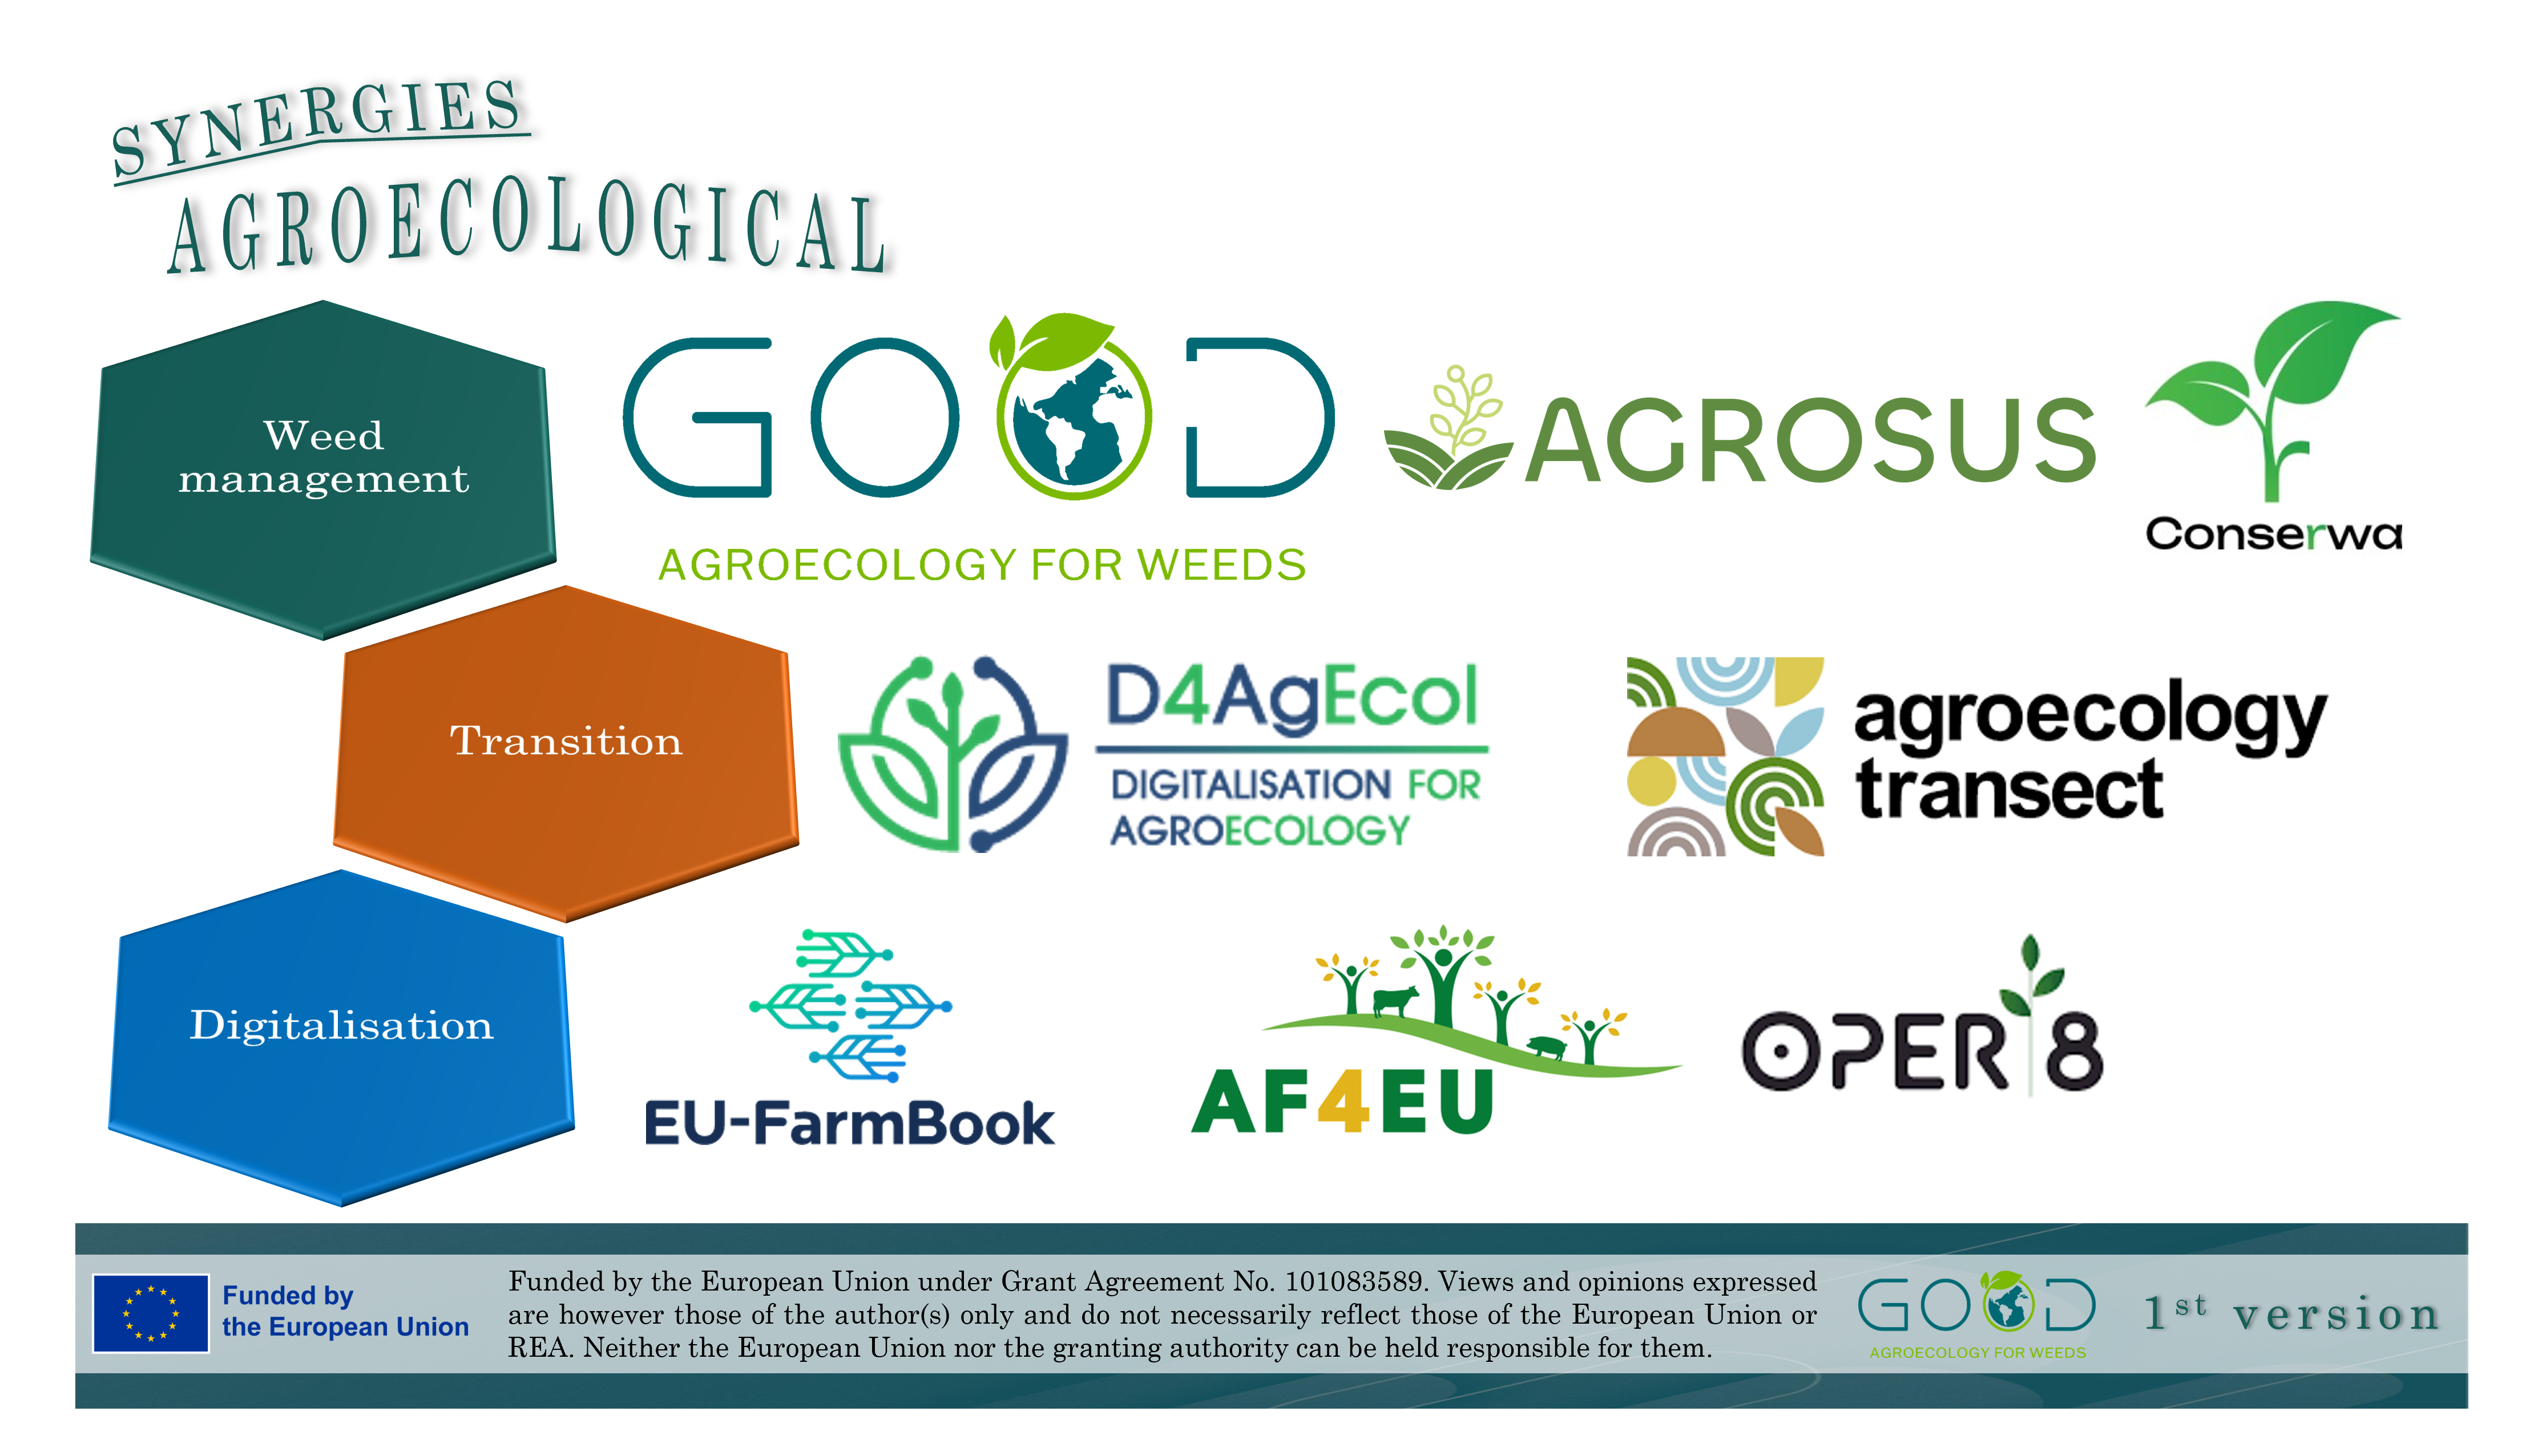 Agroecological synergies – we can do more together!